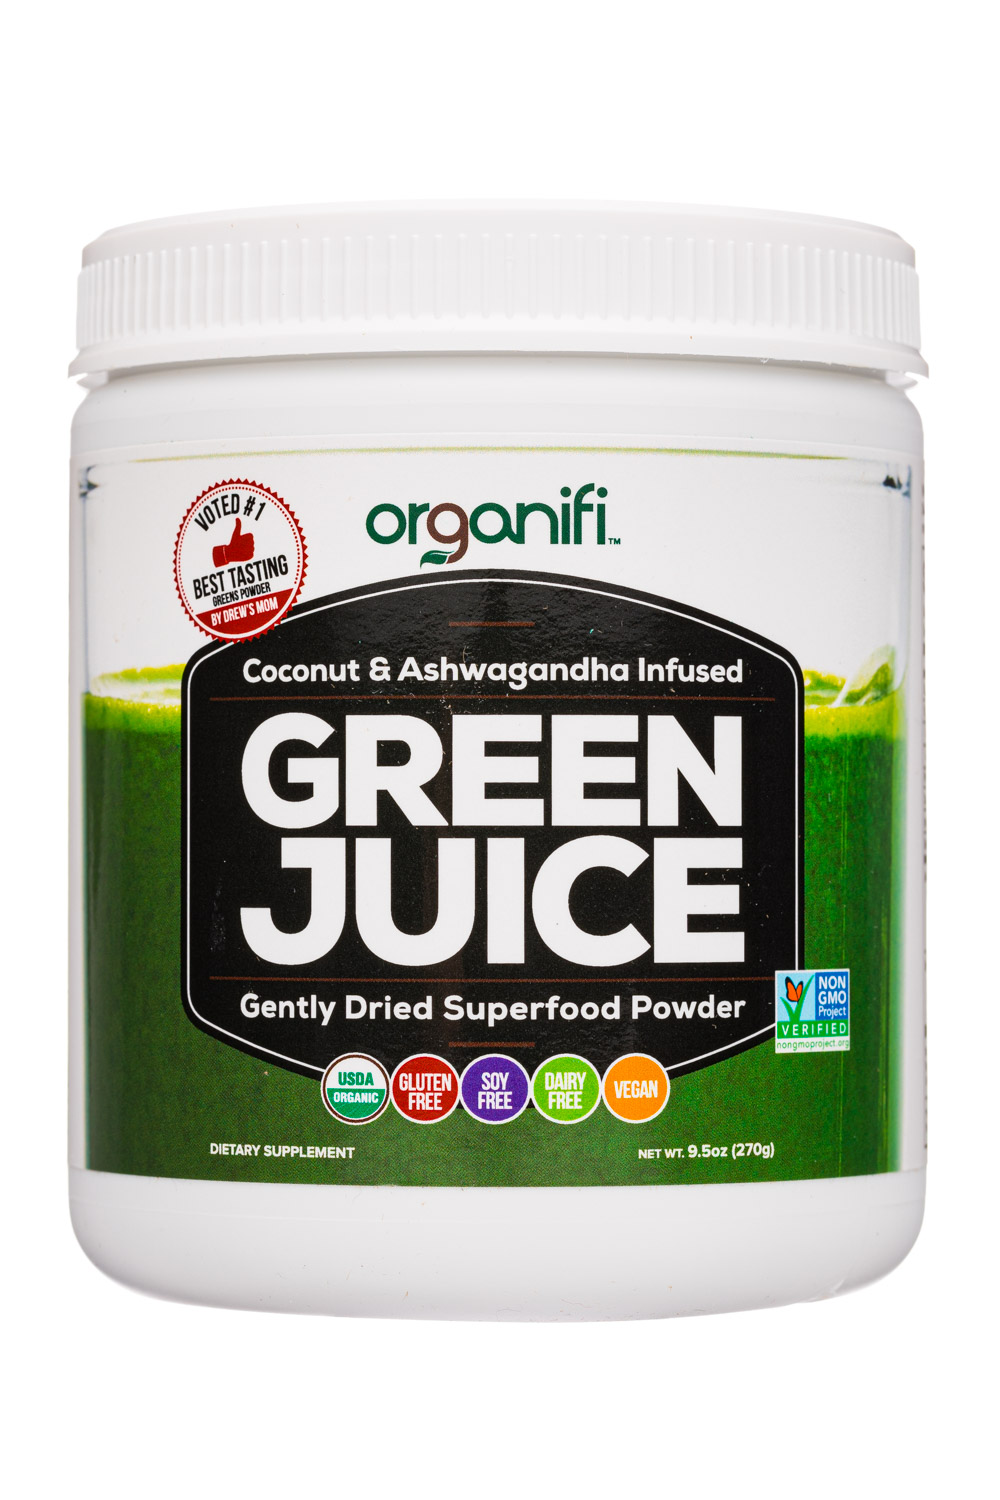 6 Simple Techniques For Organifi Green Juice Review (Don't Take Too Close To Bedtime)